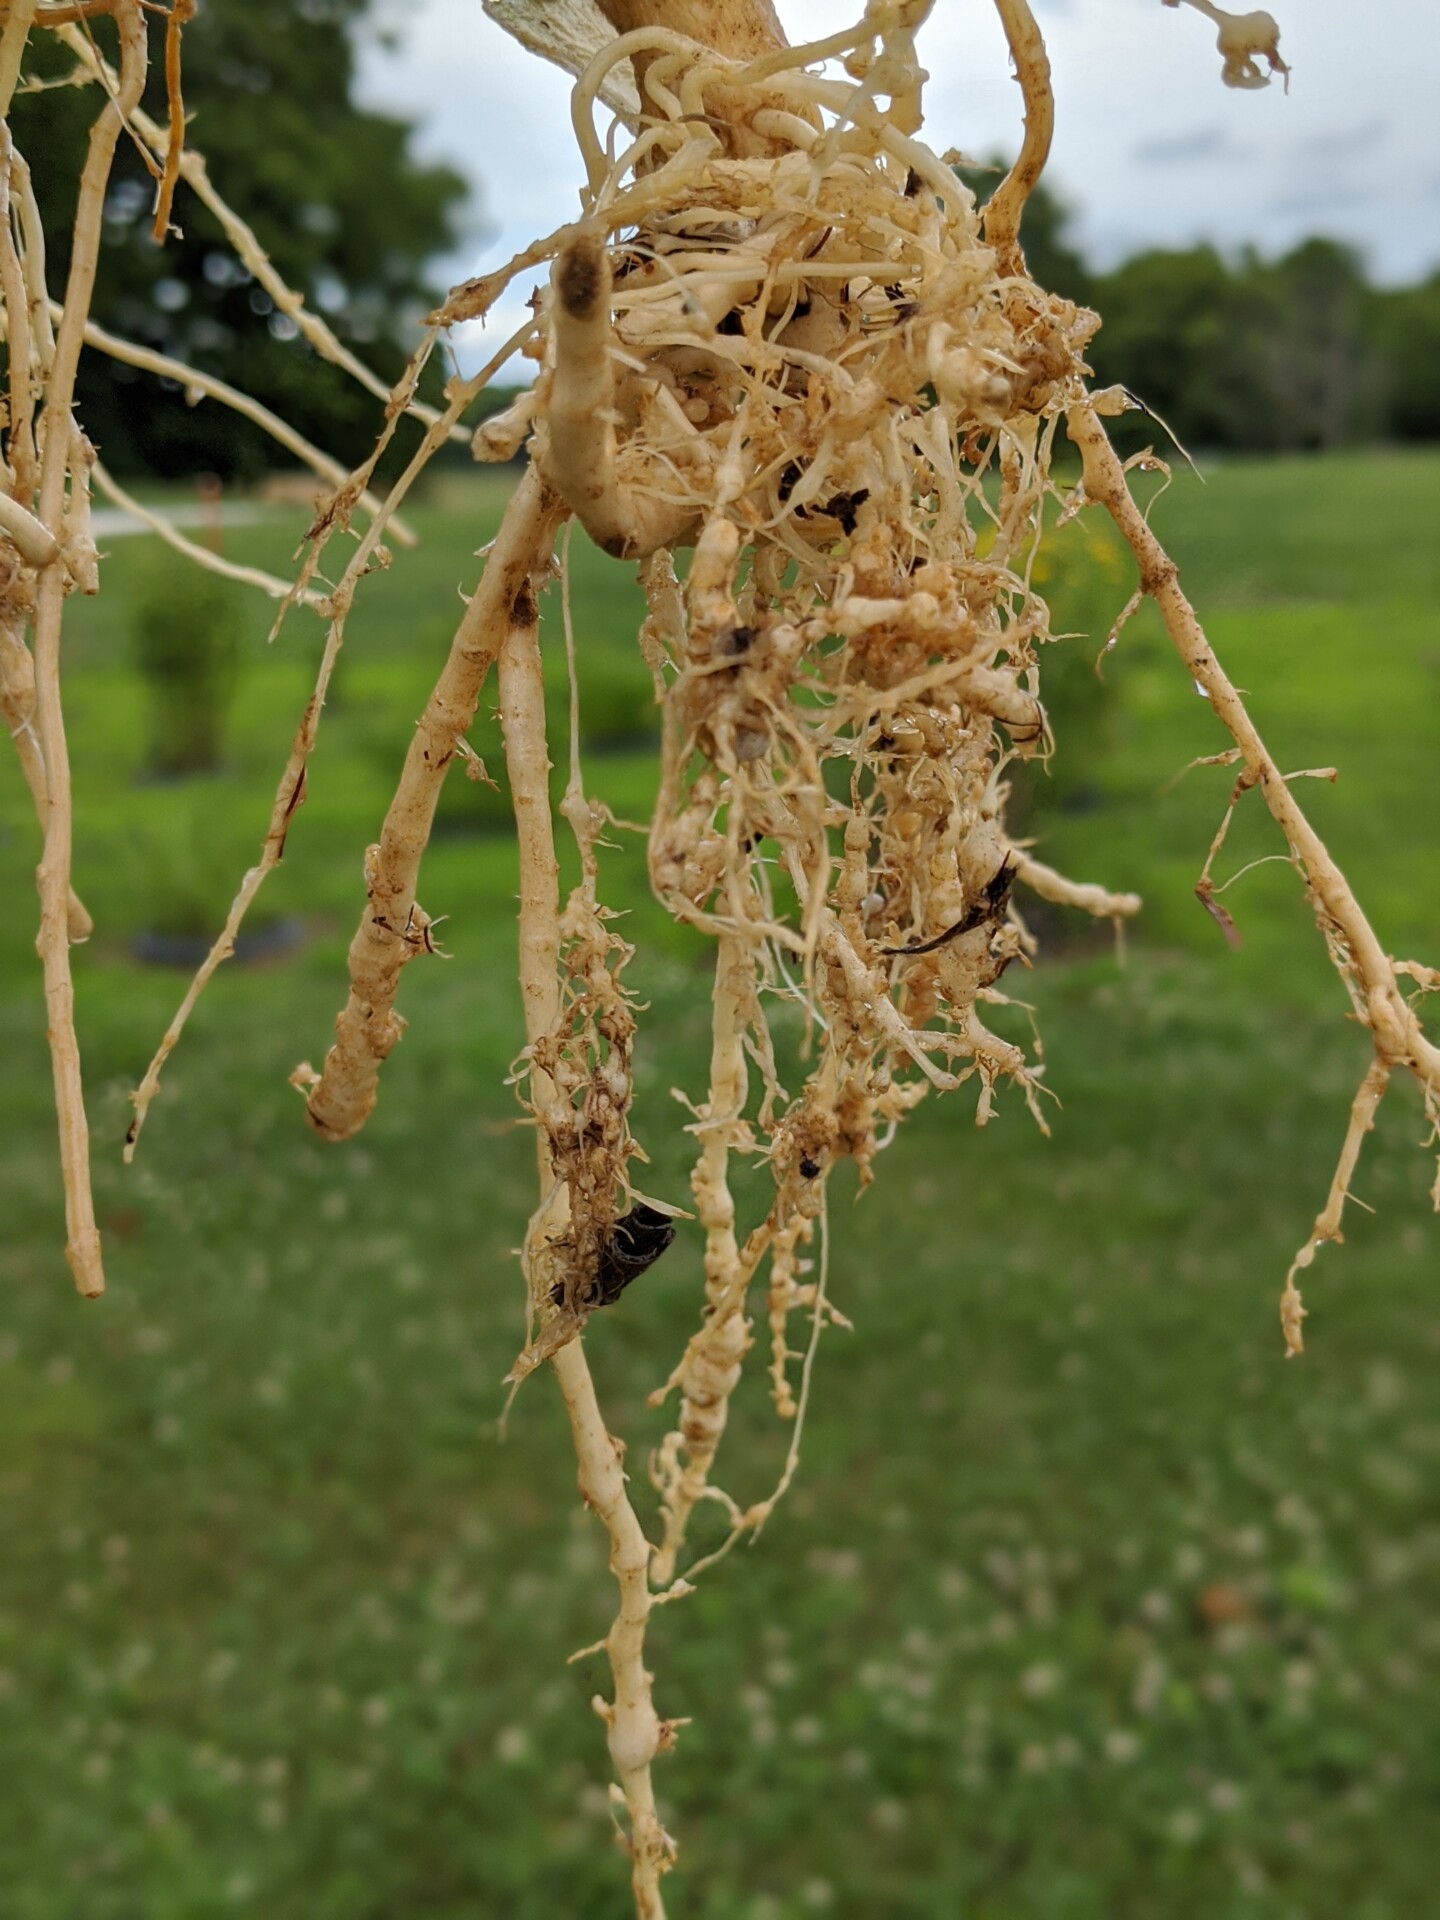 Figure 3. Root nematode galls on a watermelon root system